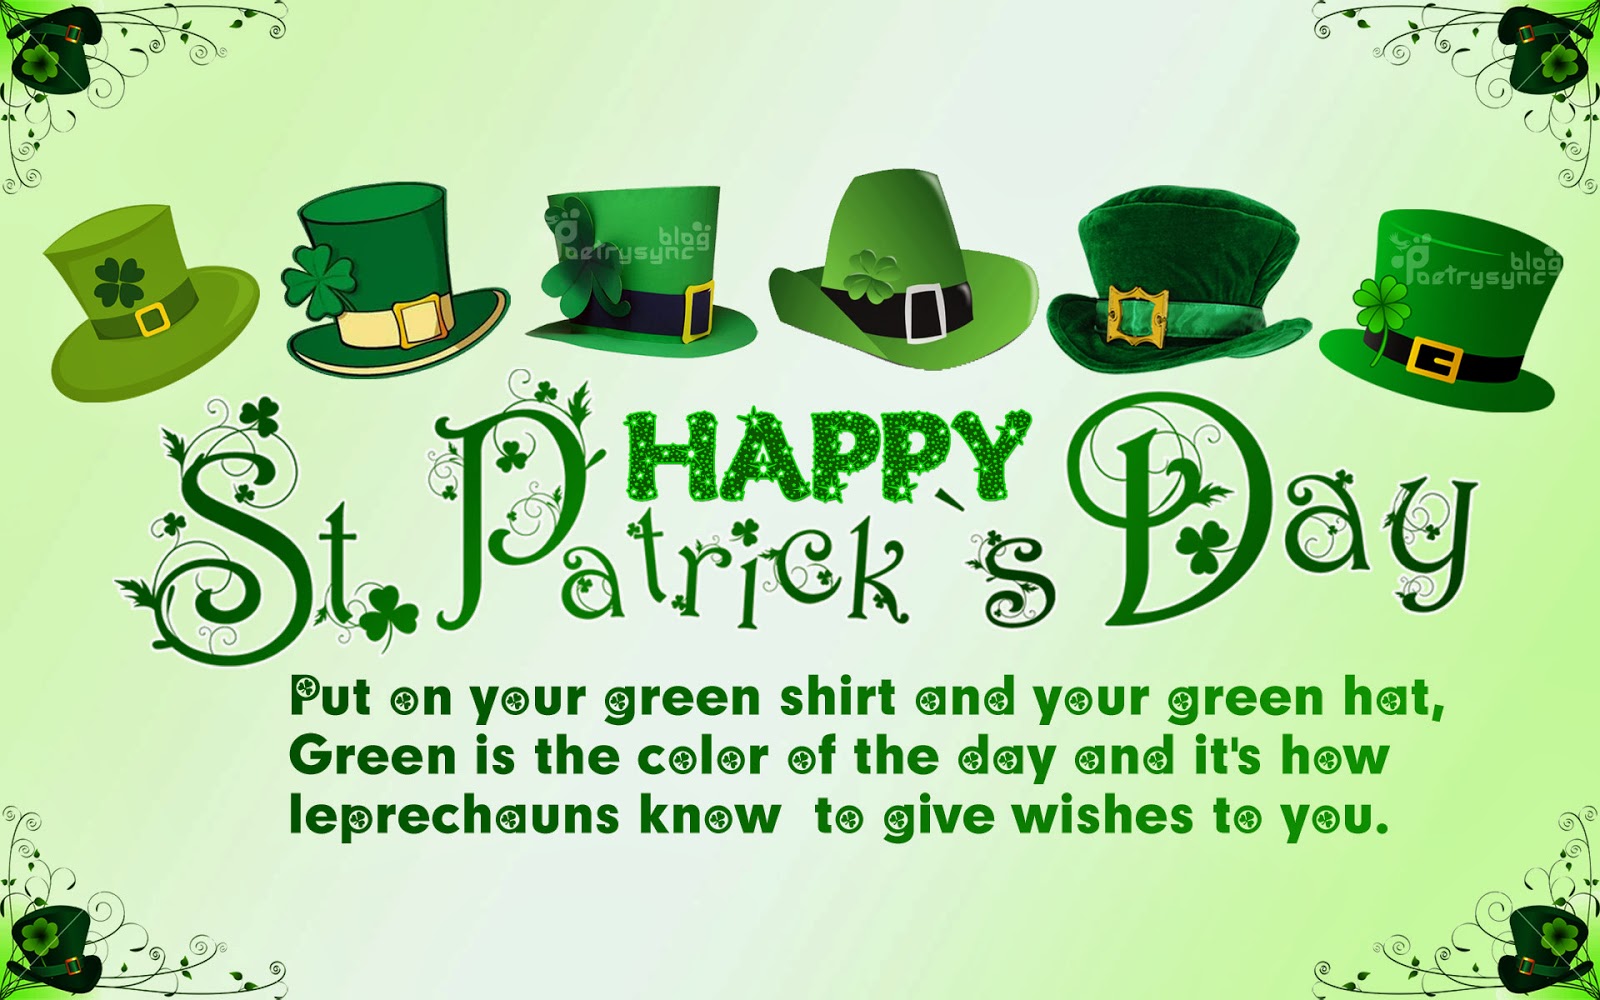 Happy Saint Patrick’s Day Put On Your Green Shirt And Your Green Hat, Green Is The Color Of The Day And It’s How Leprechauns Know To Give Wishes To You.